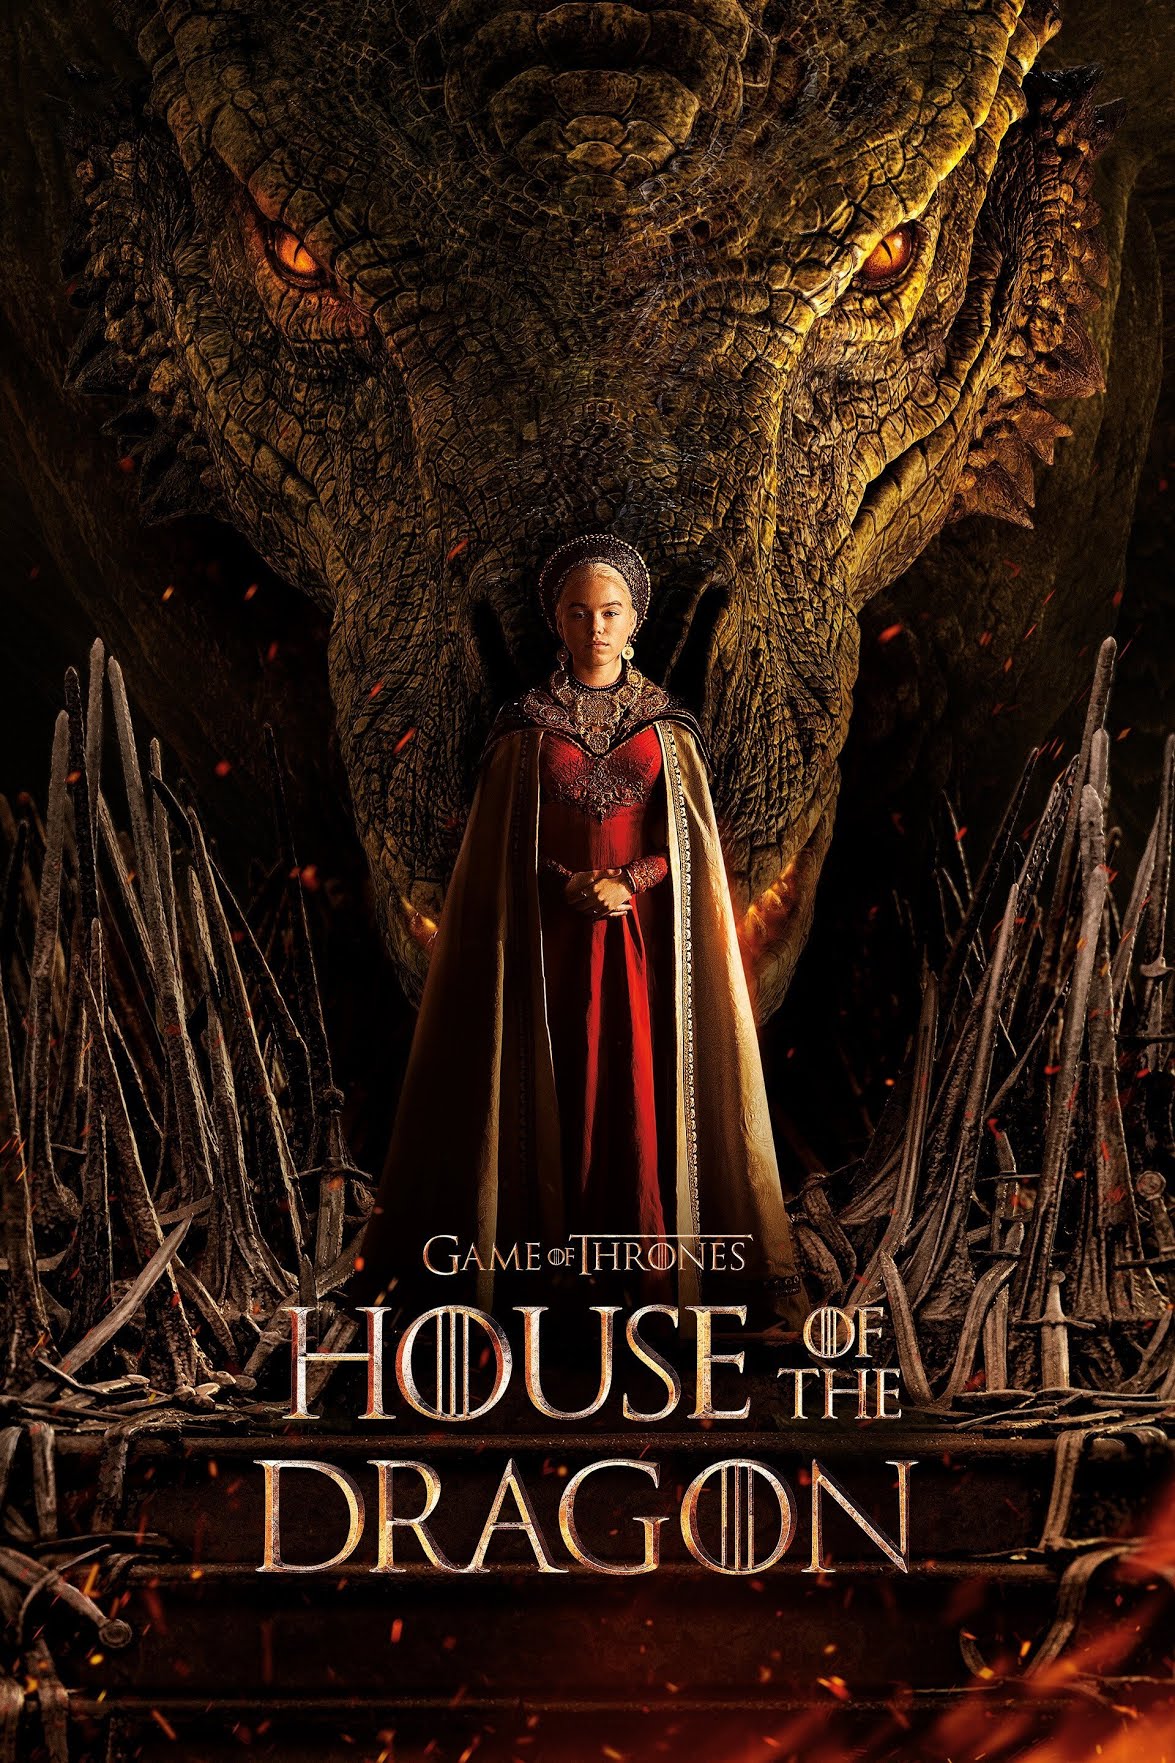 House of the Dragon (2022) Hindi Dubbed 720p HDRip 1.4GB Download